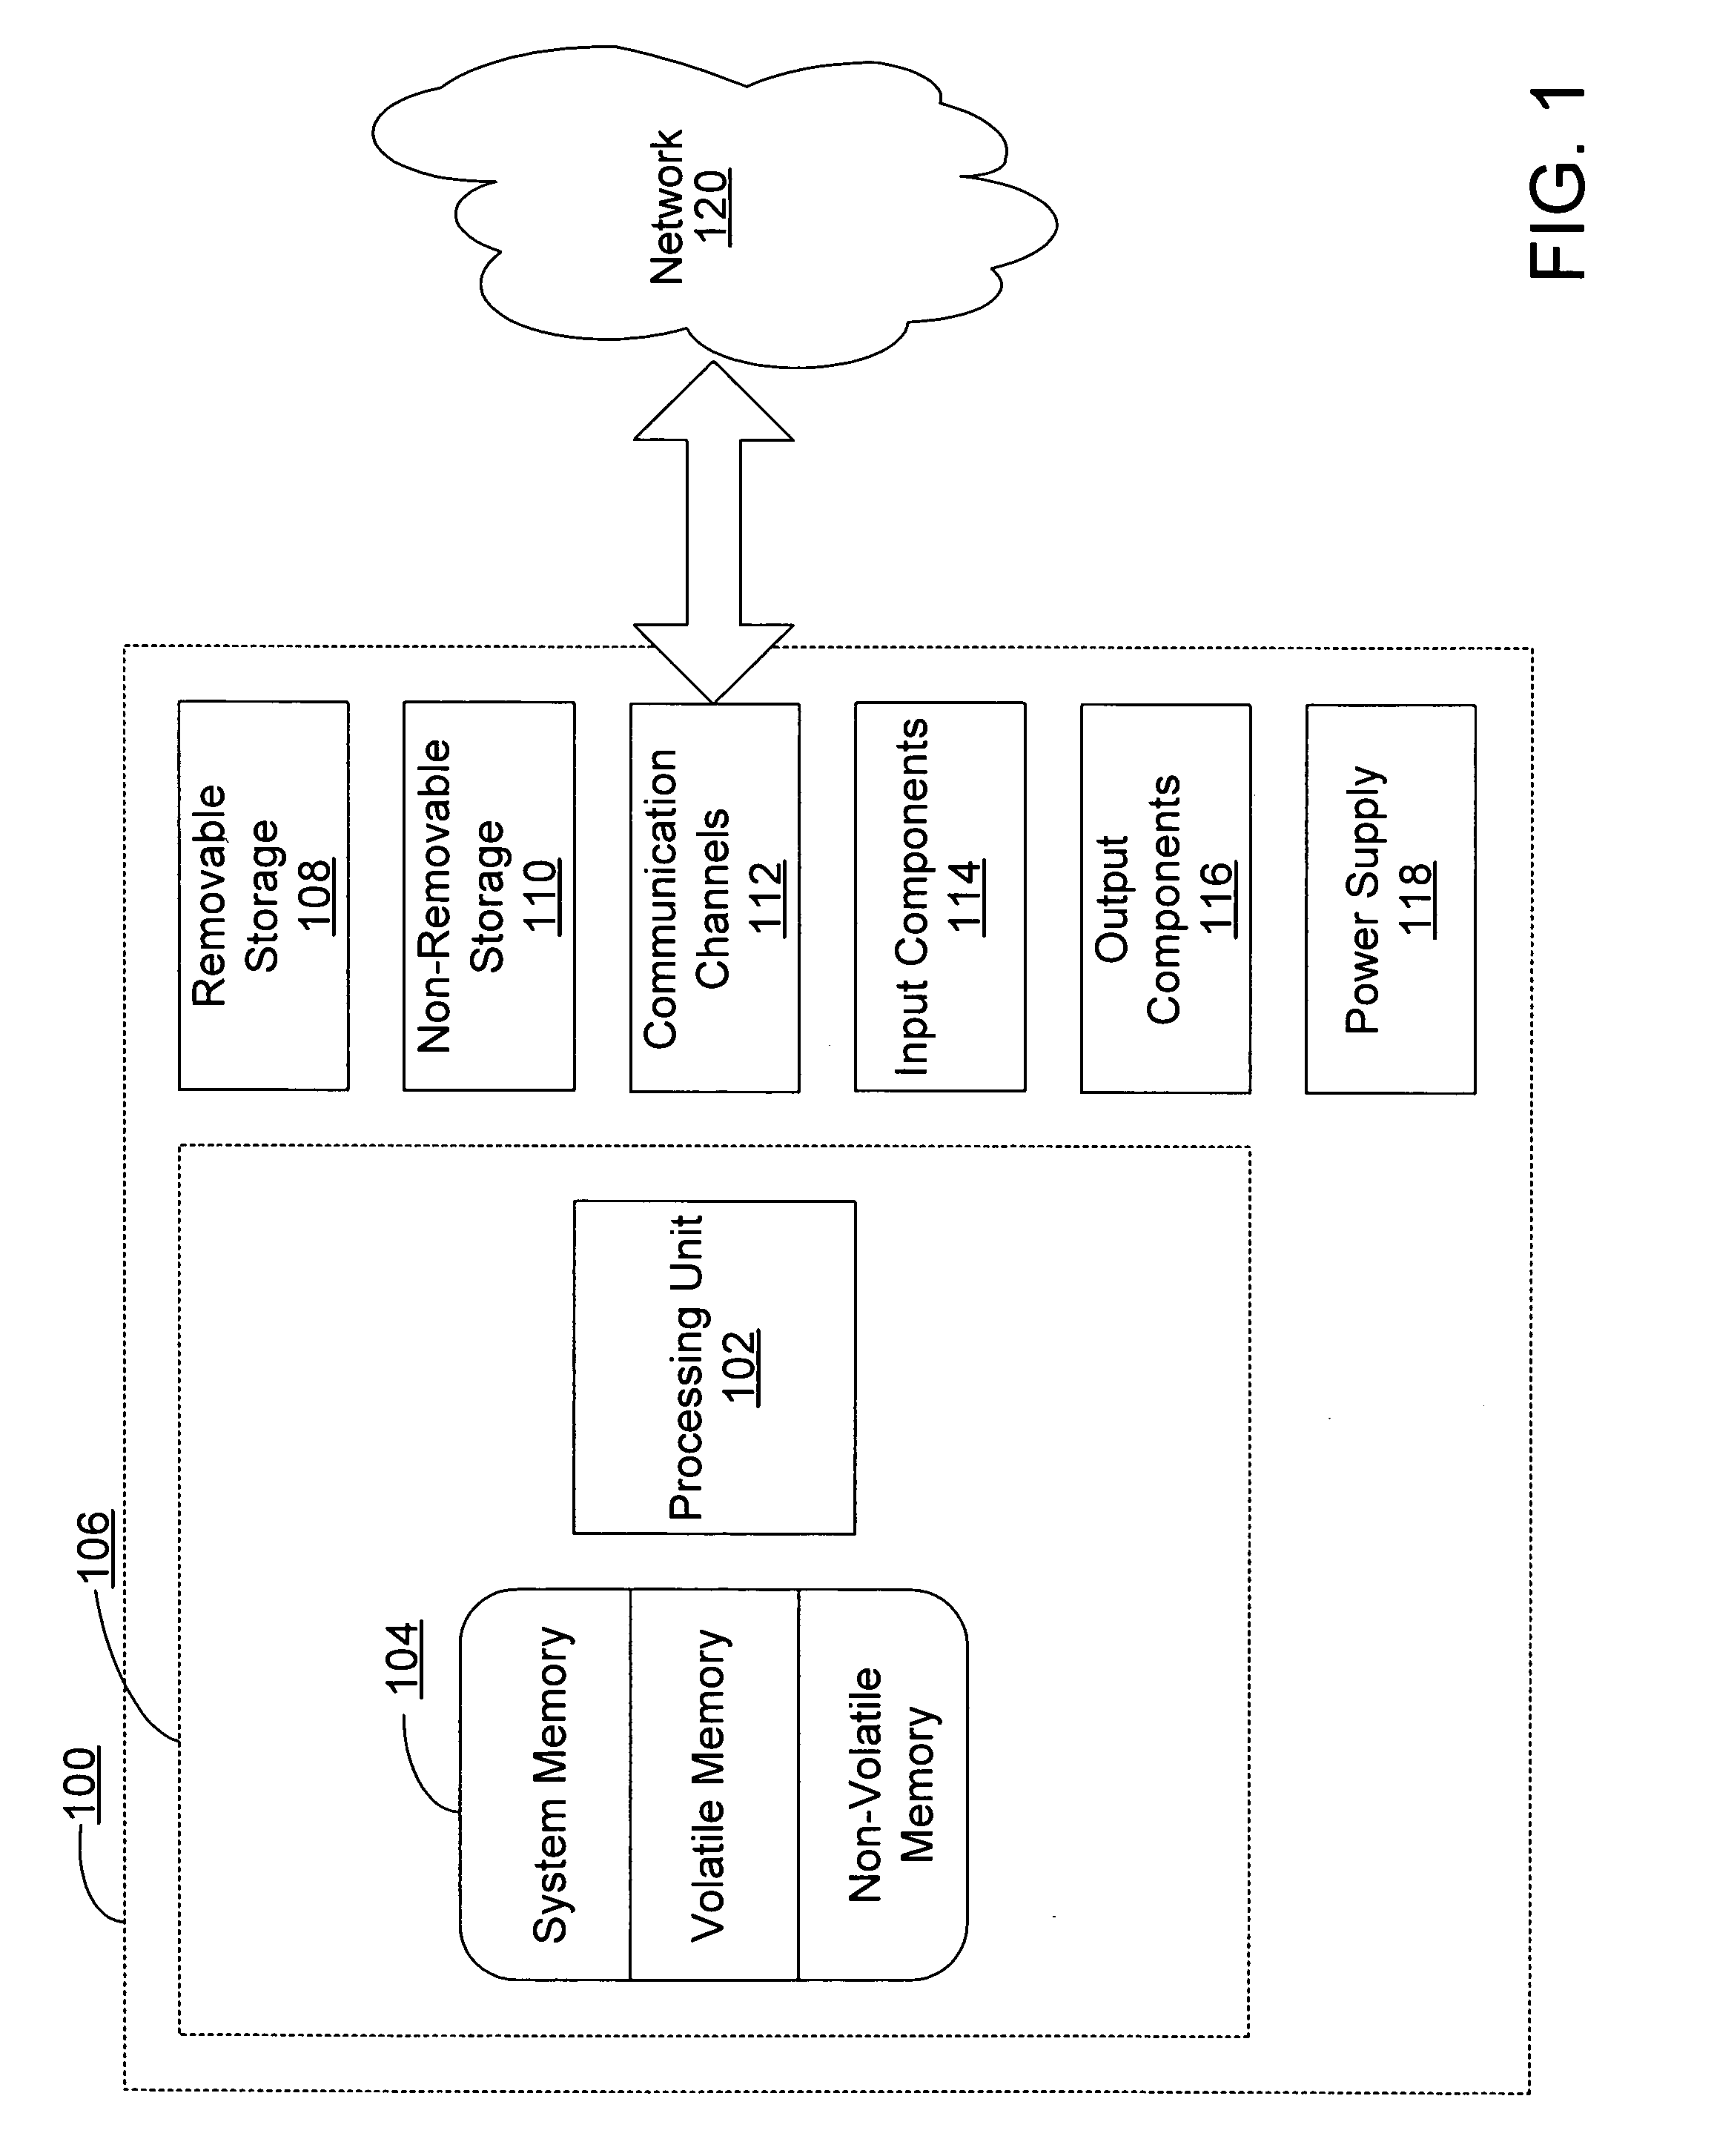 Method for dynamic application of rights management policy